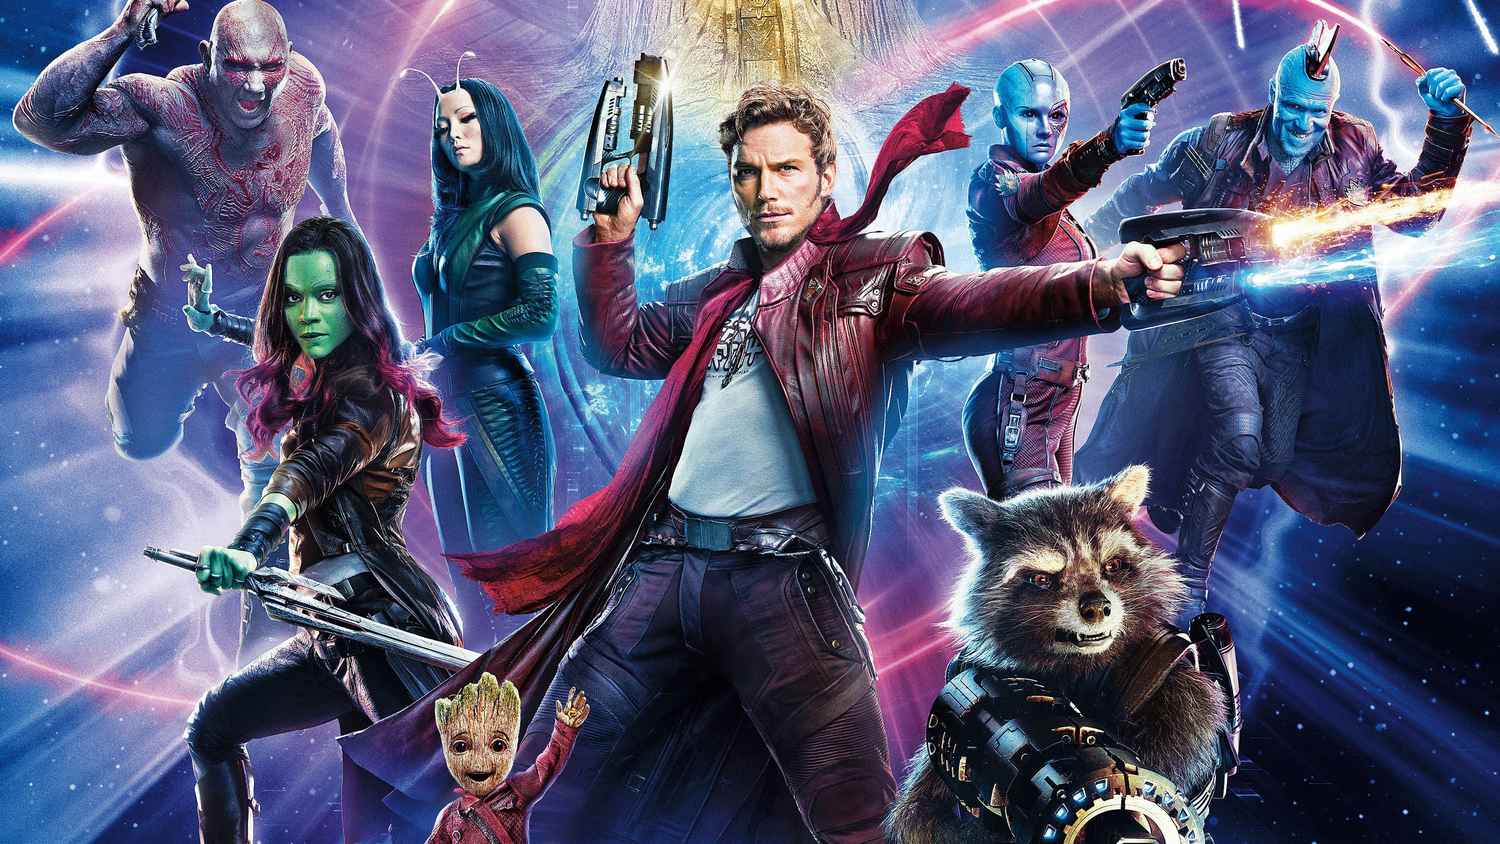 guardians of the galaxy 123movies netflix